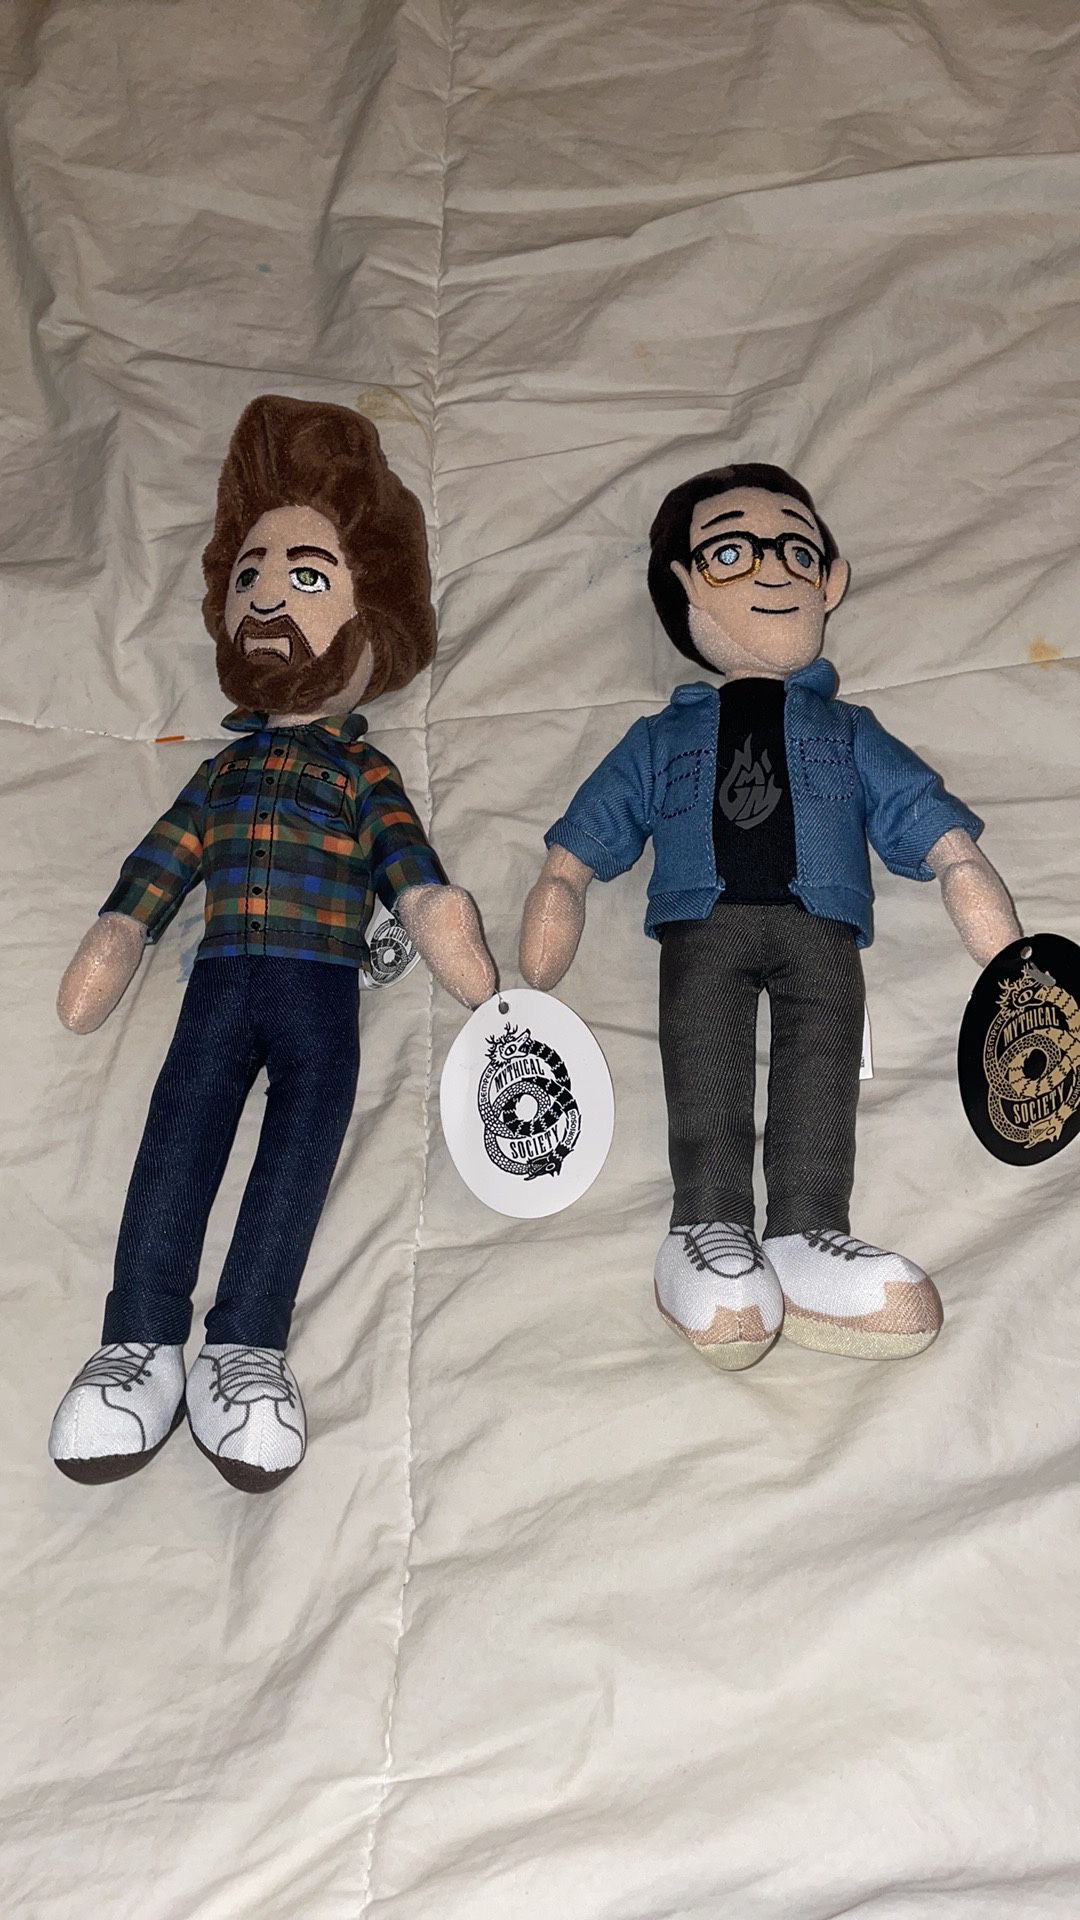 Rhett and Link Talking Plushies Good Mythical Society Exclusive